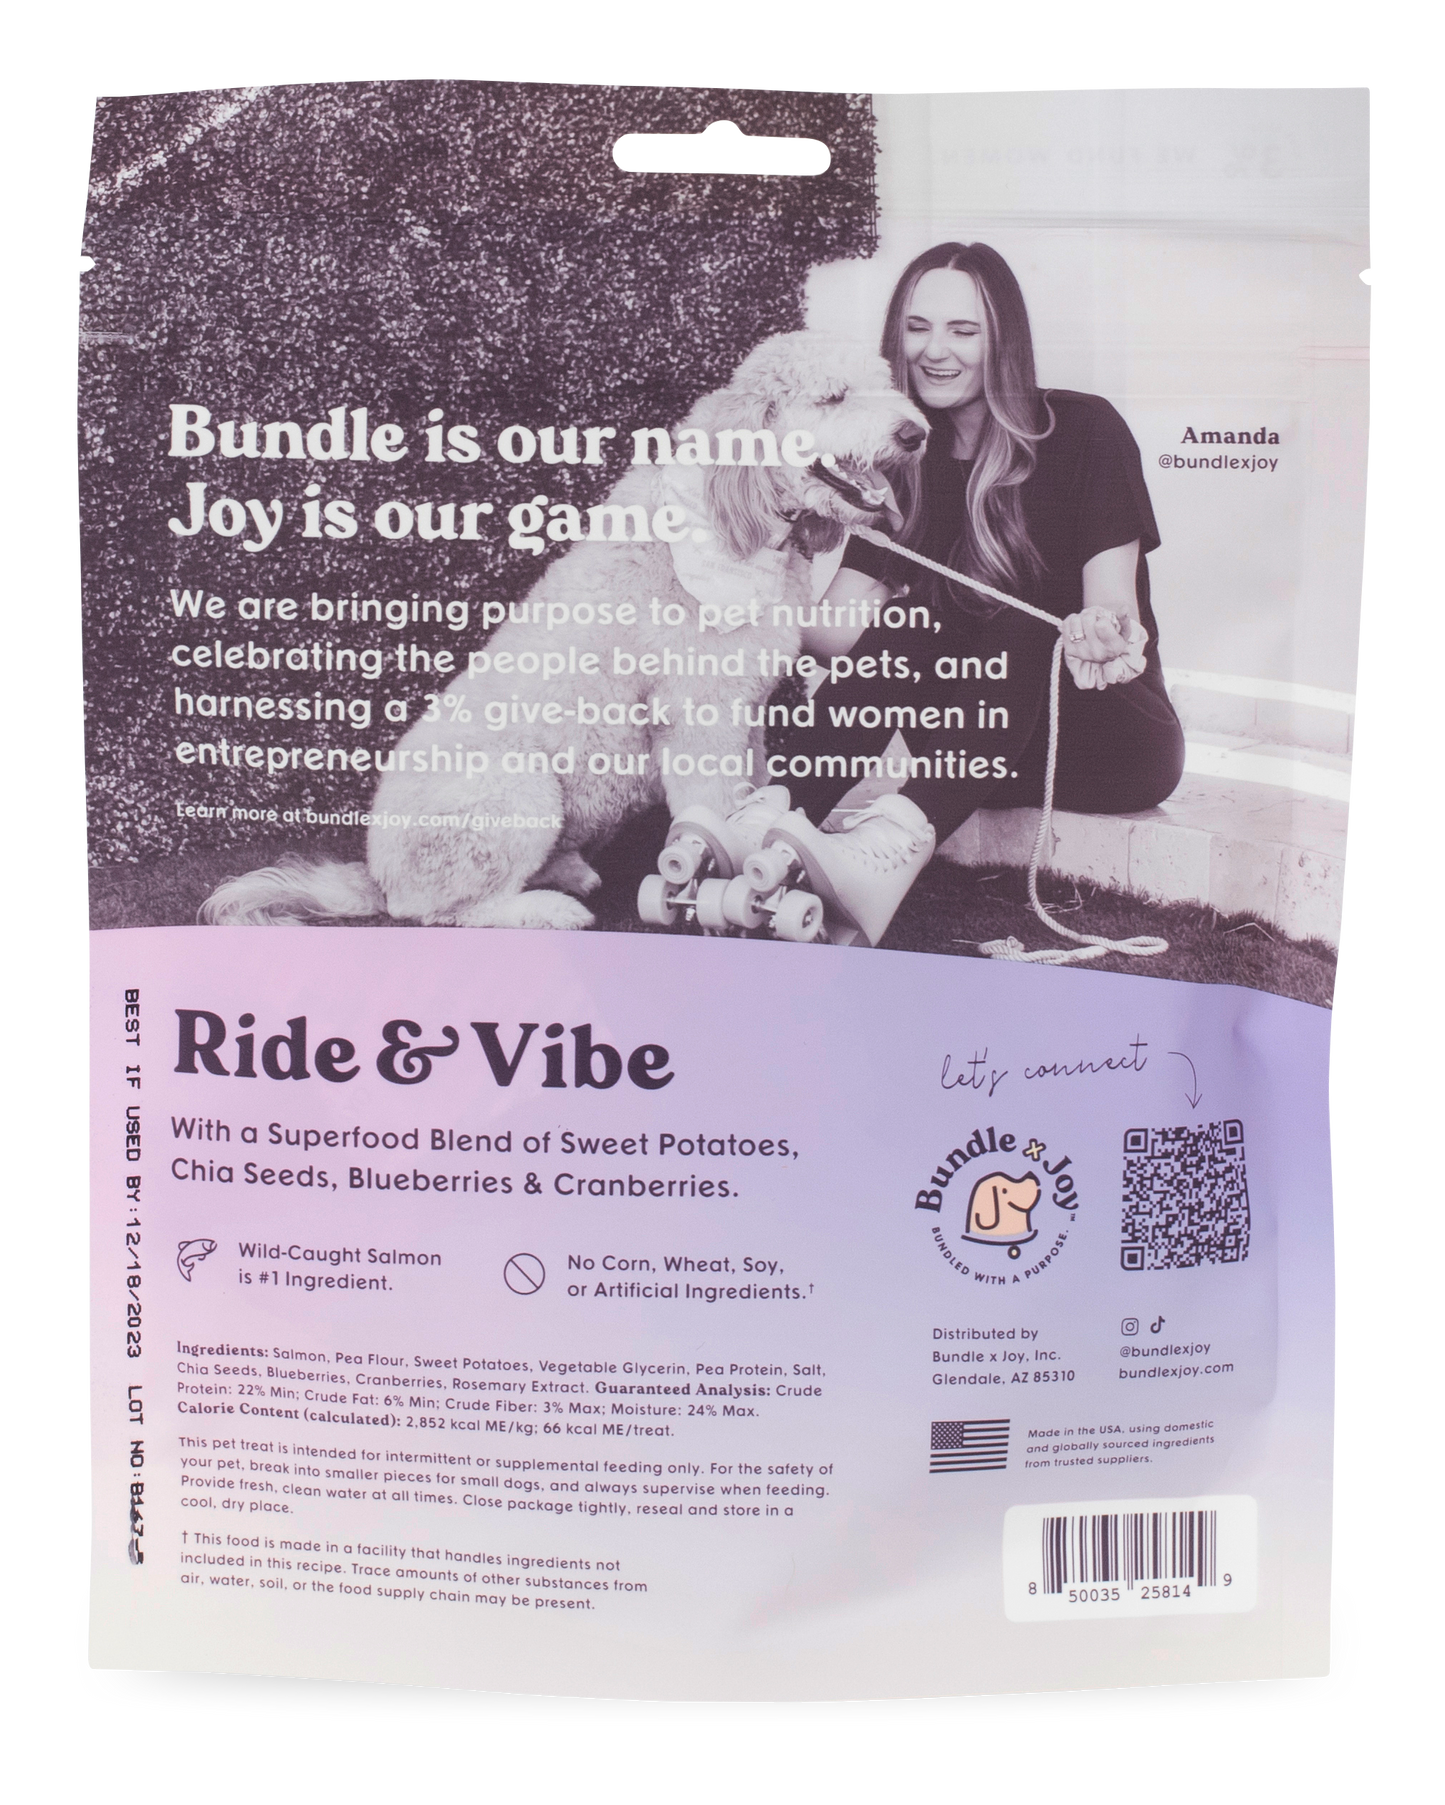 Ride & Vibe Salmon Superfood Jerky Bars for Dogs 5oz